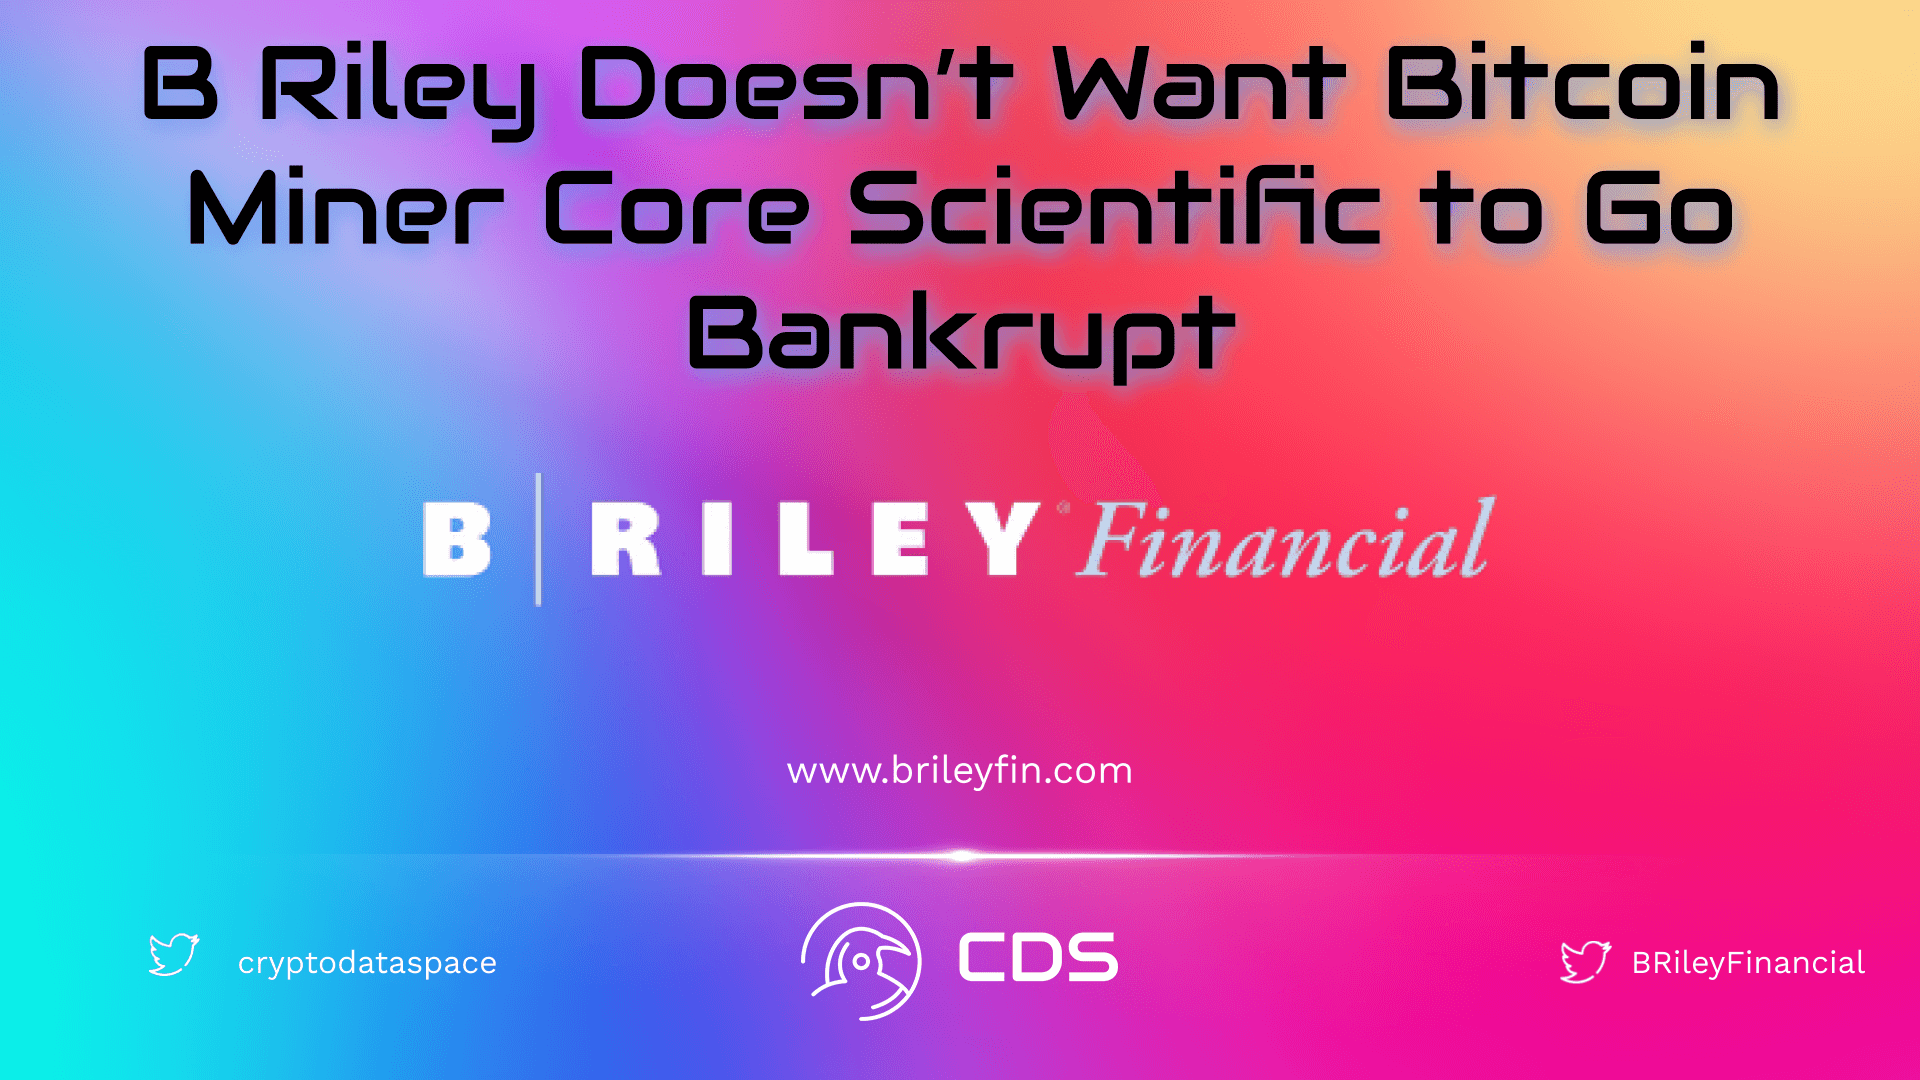 B Riley Doesn’t Want Bitcoin Miner Core Scientific to Go Bankrupt